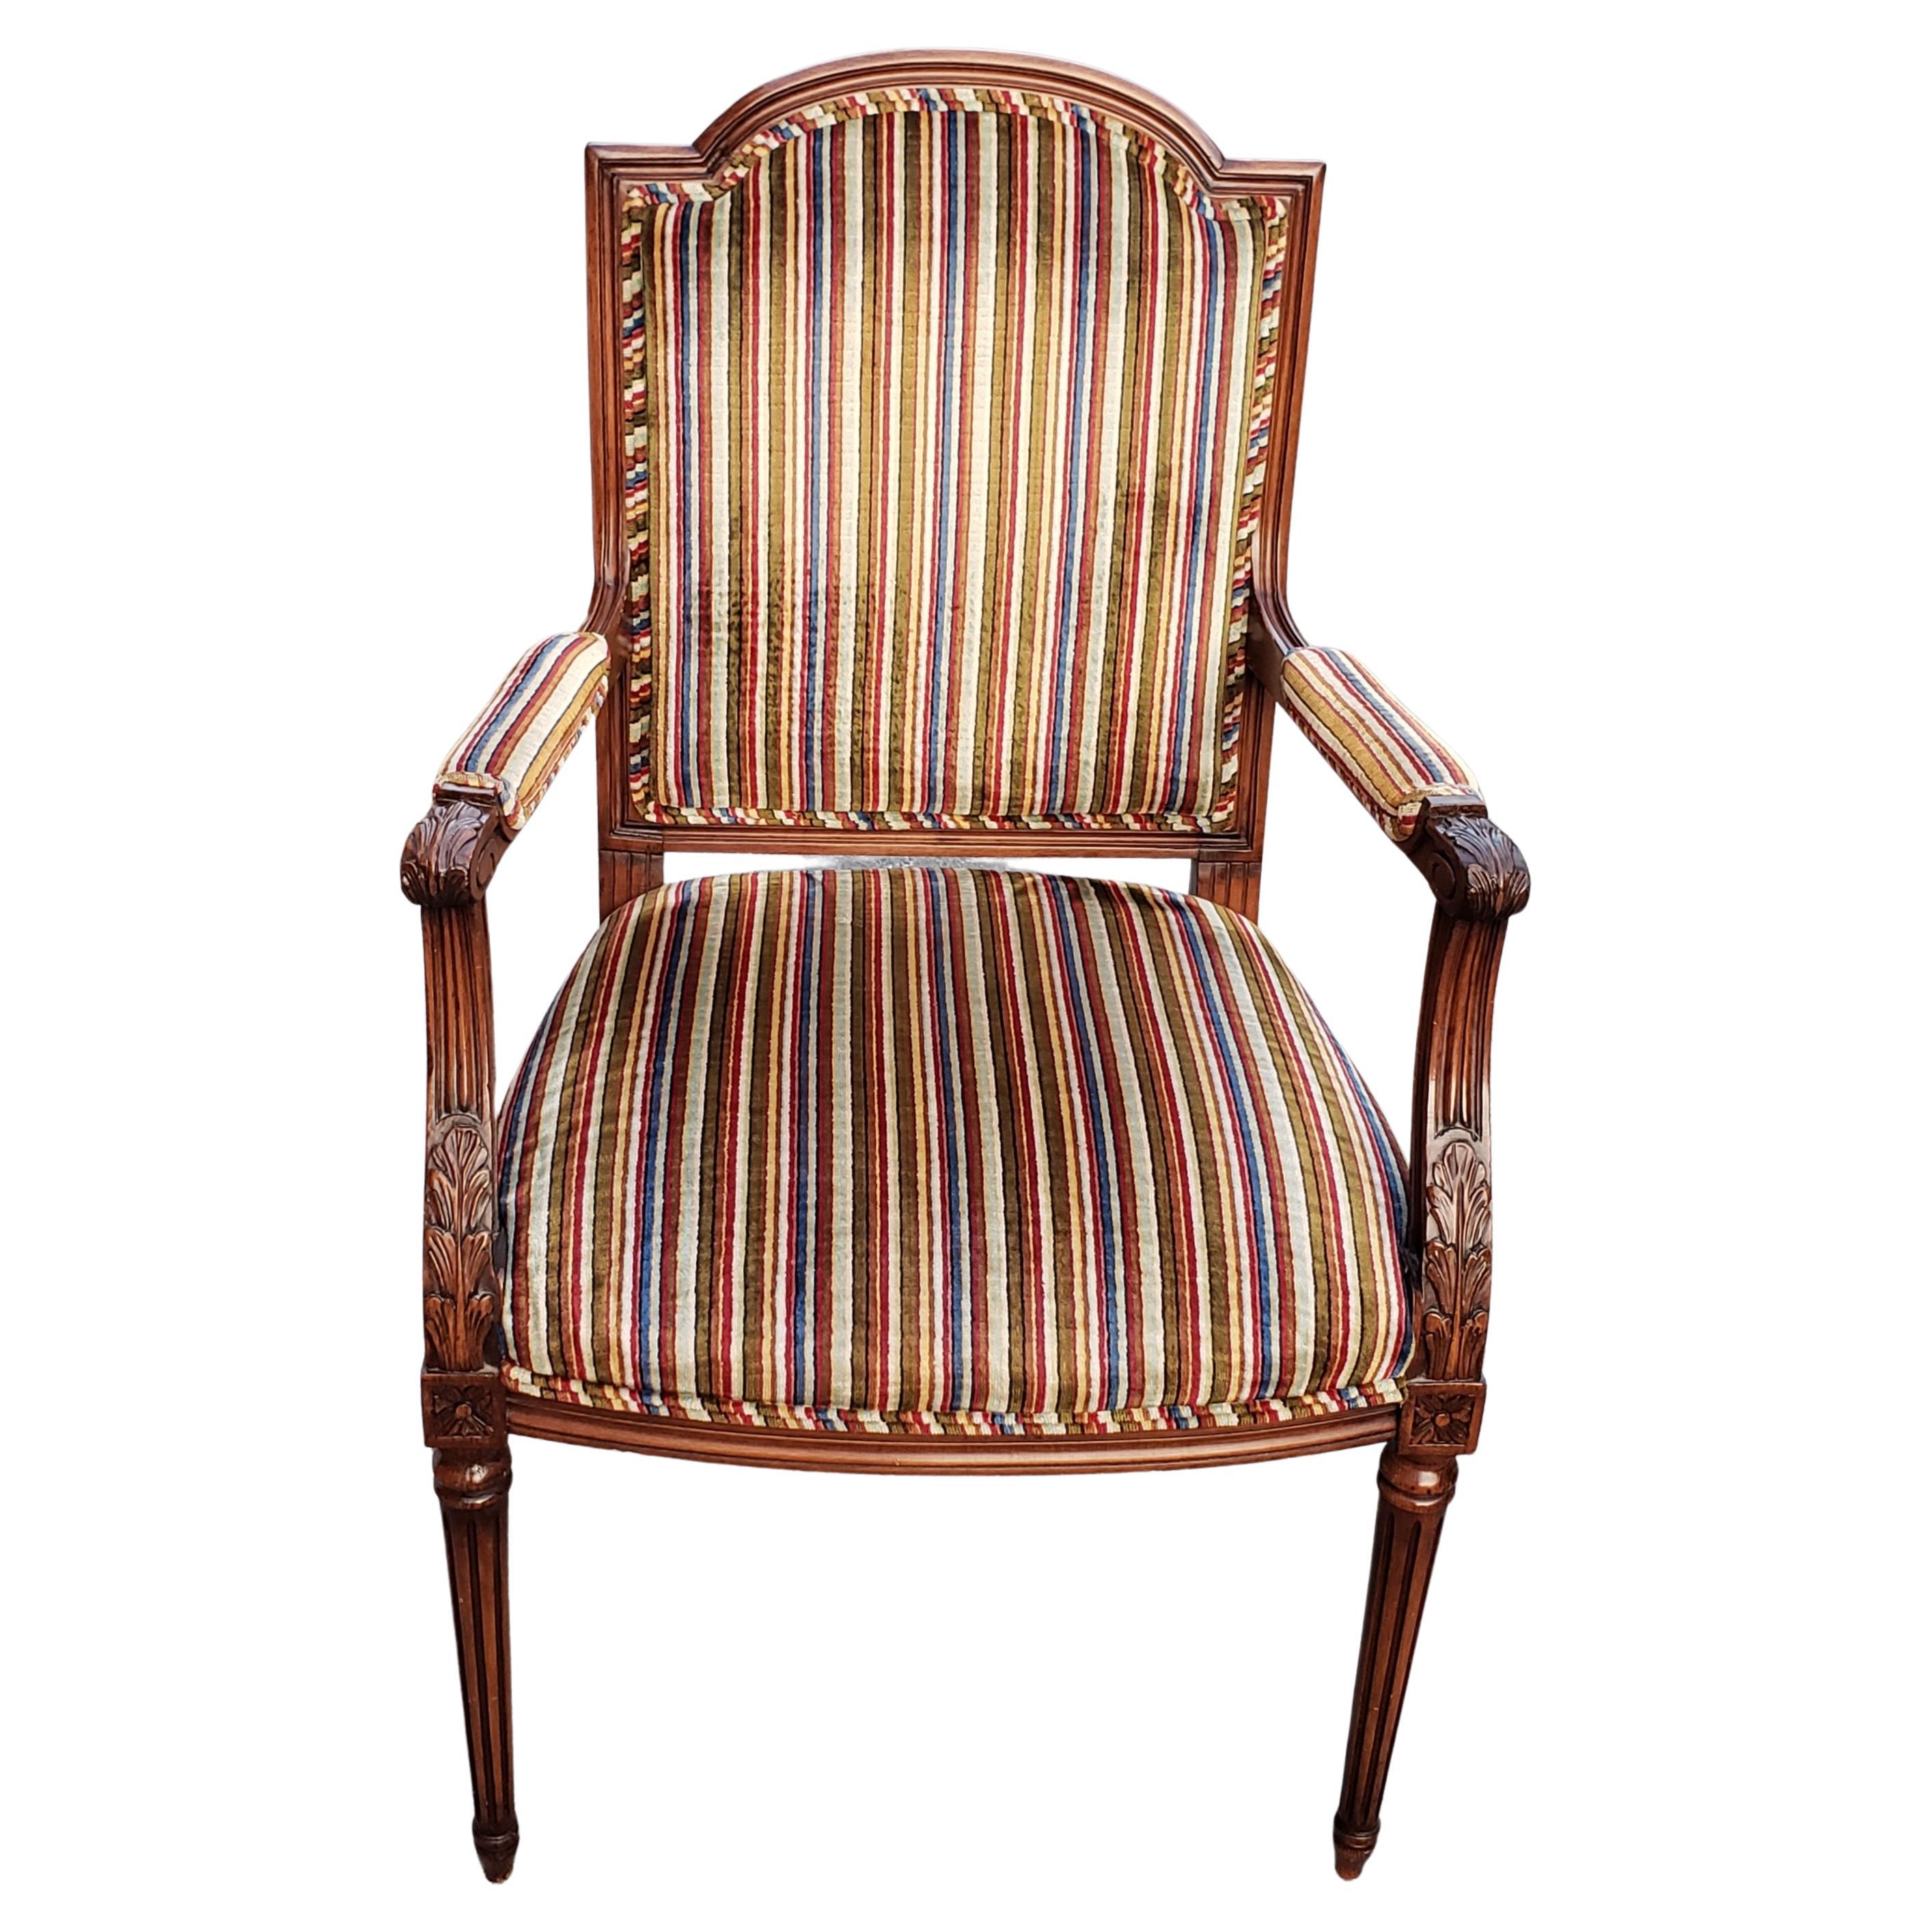 Acanthus leaves carvings. Cannelured legs. Striped upholstery in very good vintage condition. 
Measures 24